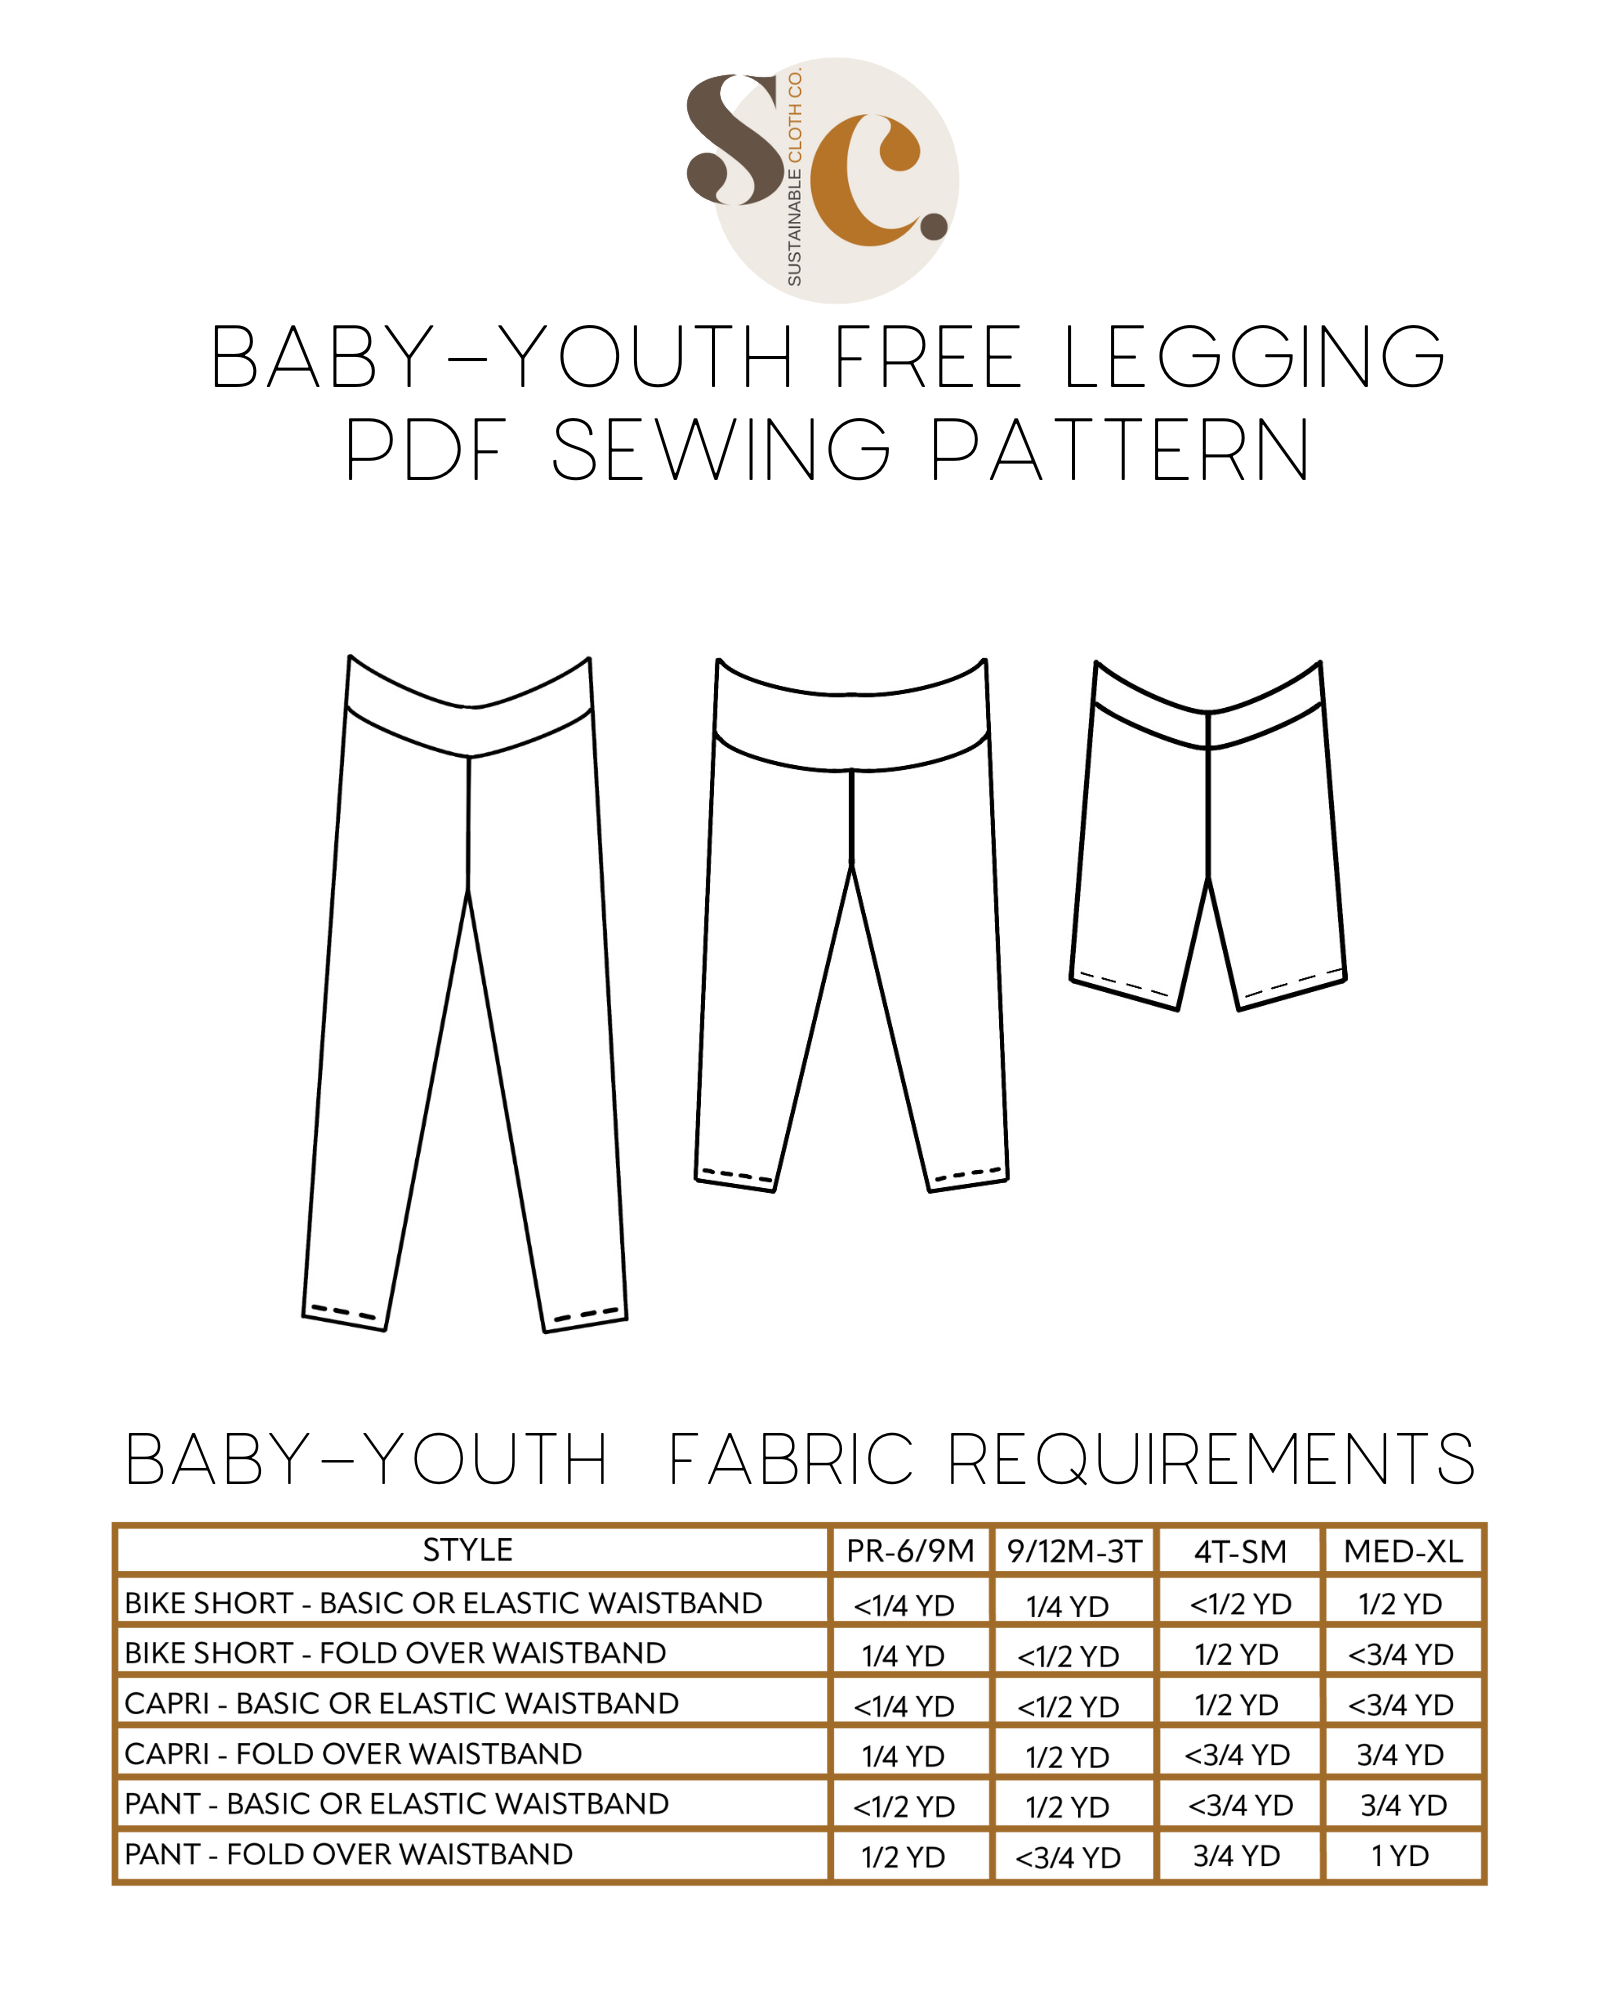 Baby footed pants pattern PDF, baby sewing patterns pdf, baby sewing pattern